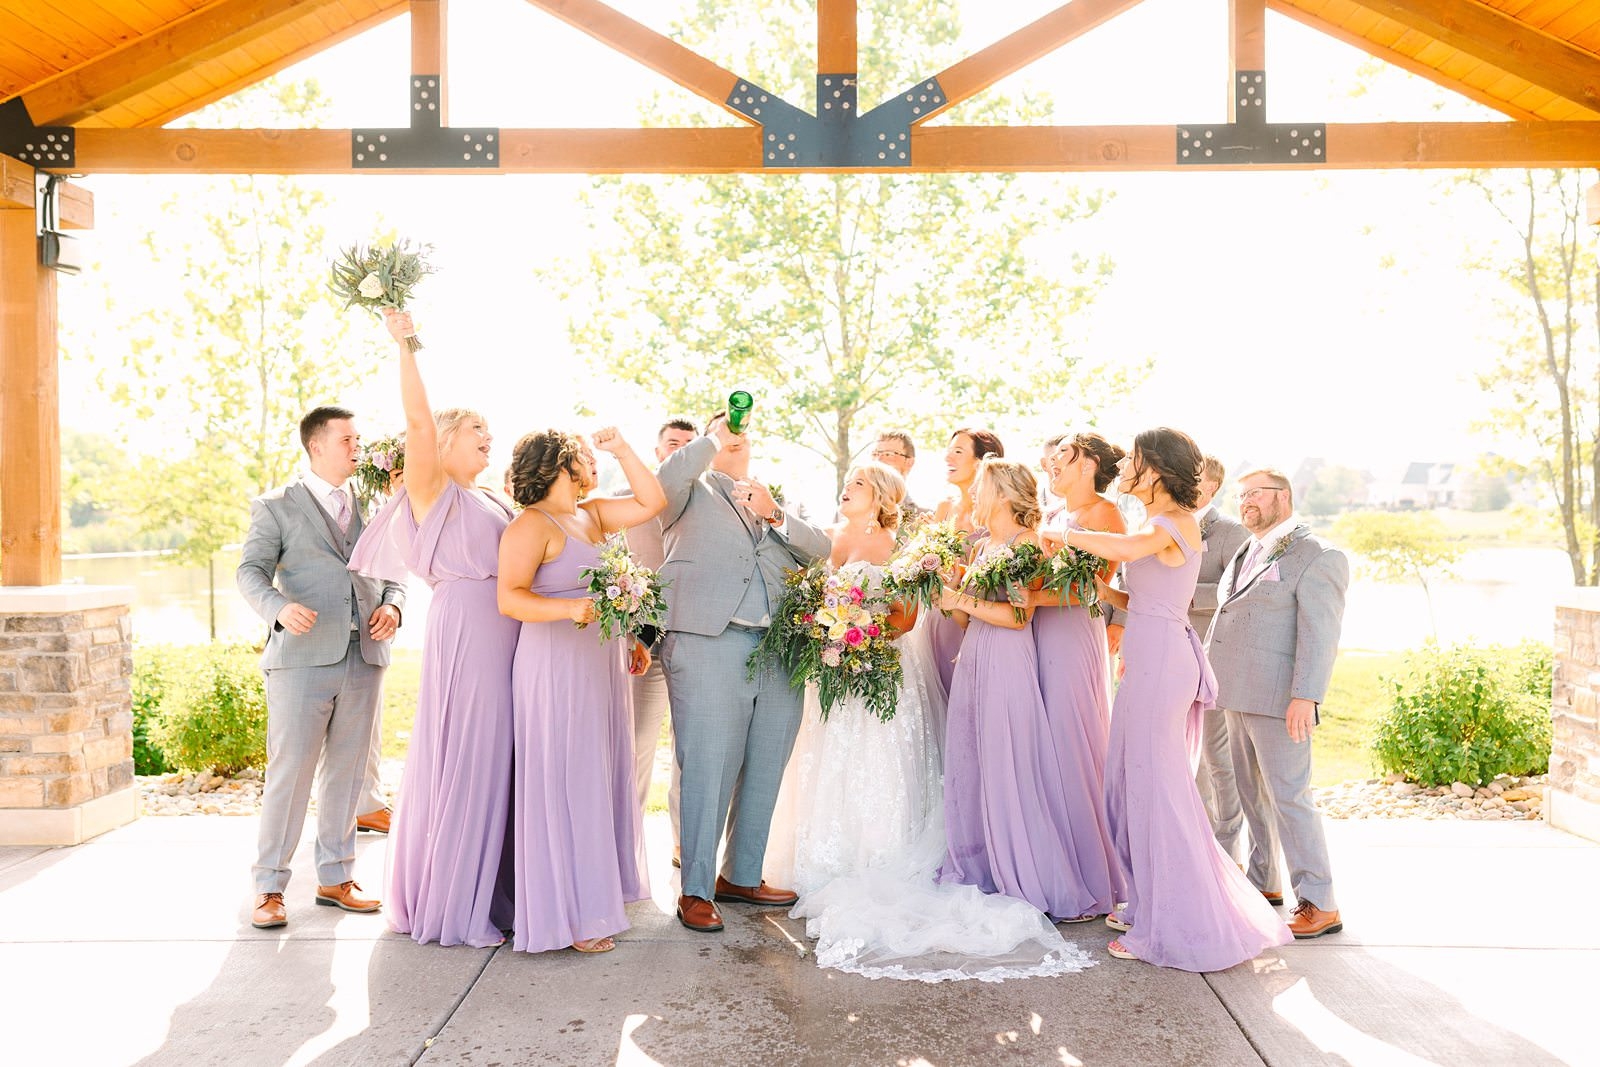 A Sunny Summer Wedding at Friedman Park in Newburgh Indiana | Paige and Dylan | Bret and Brandie Photography143.jpg